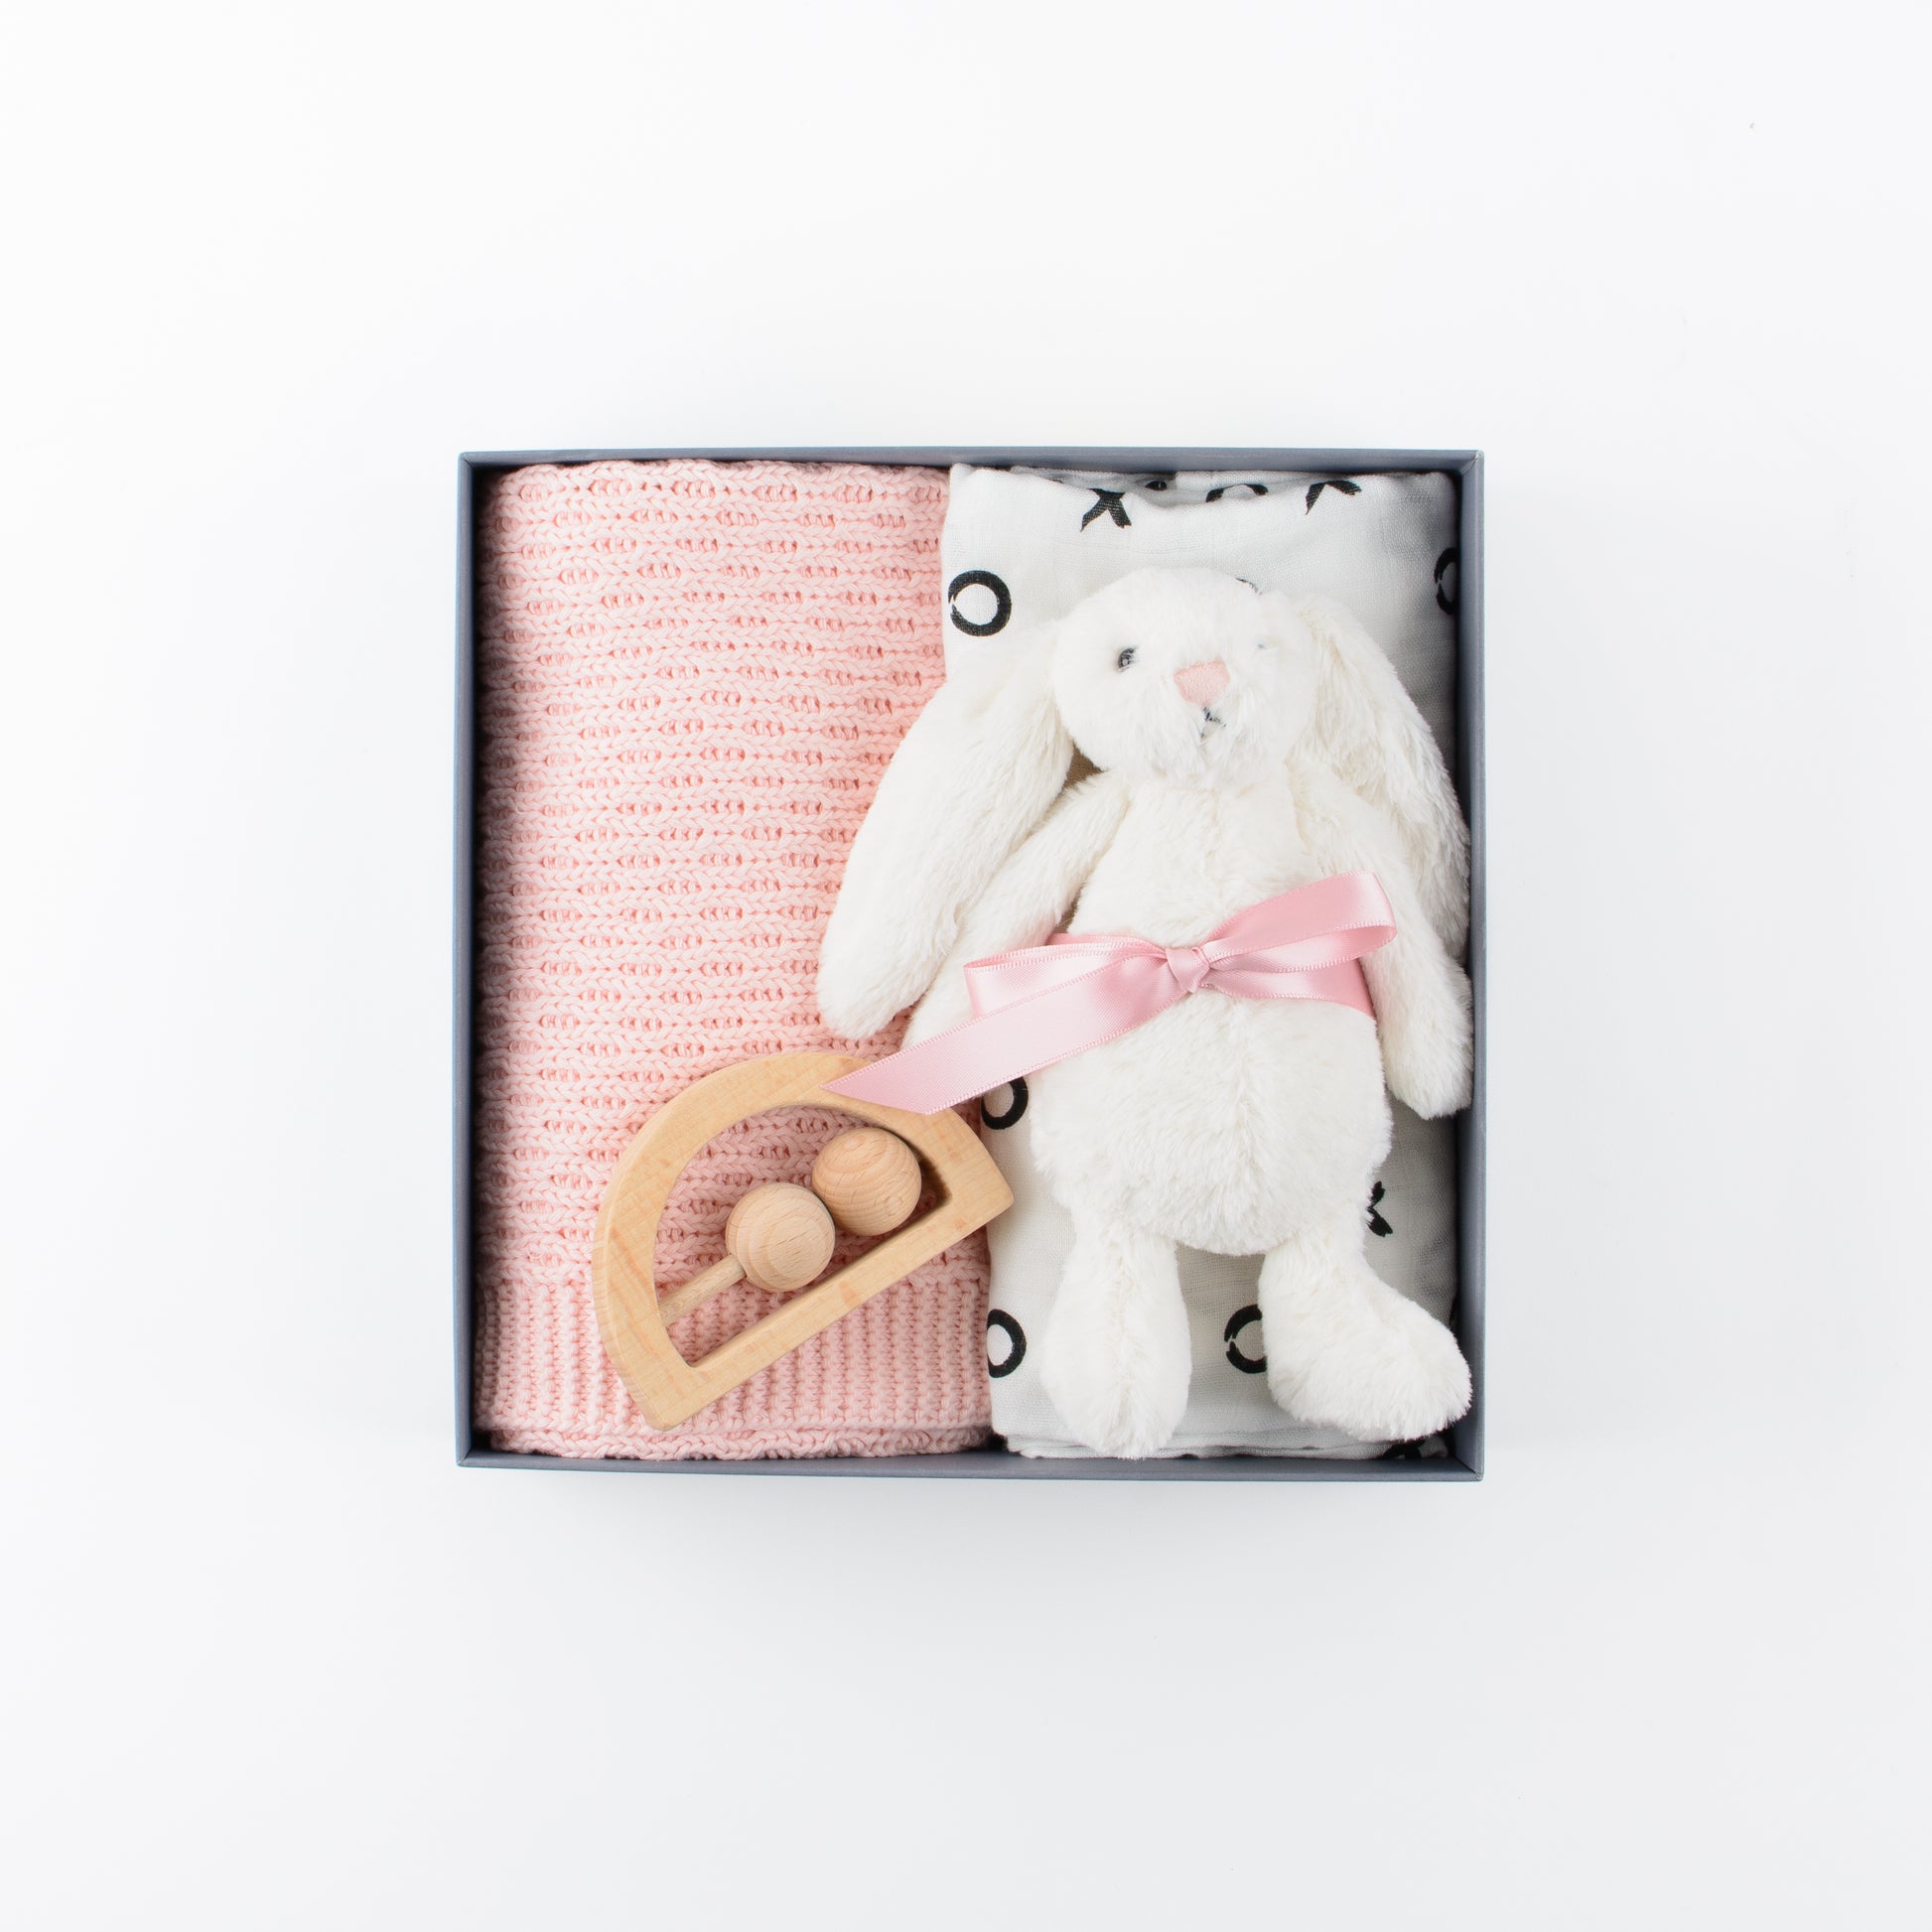 Gift box includes soft toy, blanket, swaddle, wooden teether.